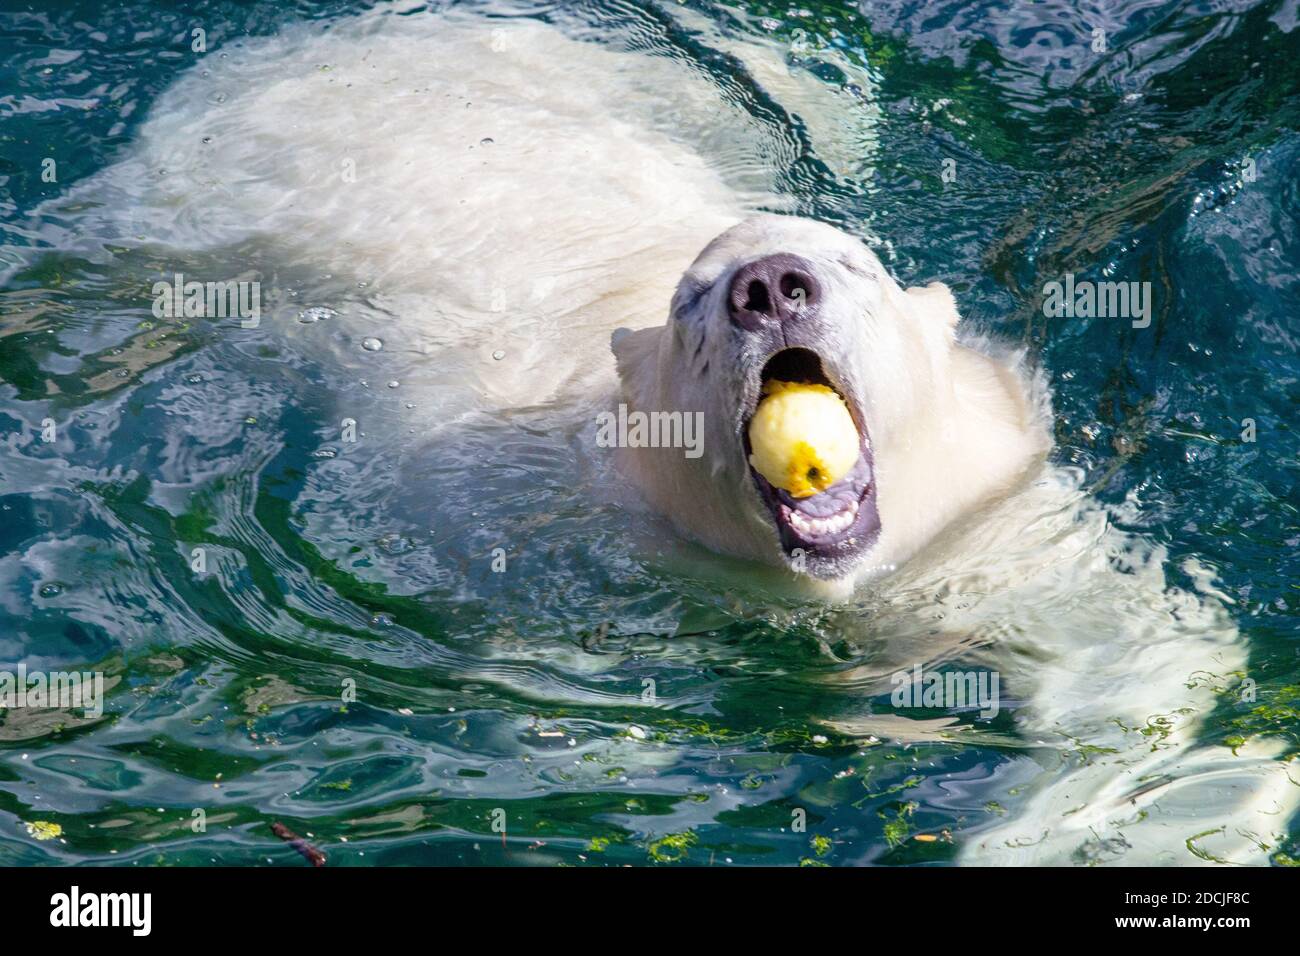 Image of a young polar bear with an apple in its mouth, scientific name Ursus maritimus Stock Photo